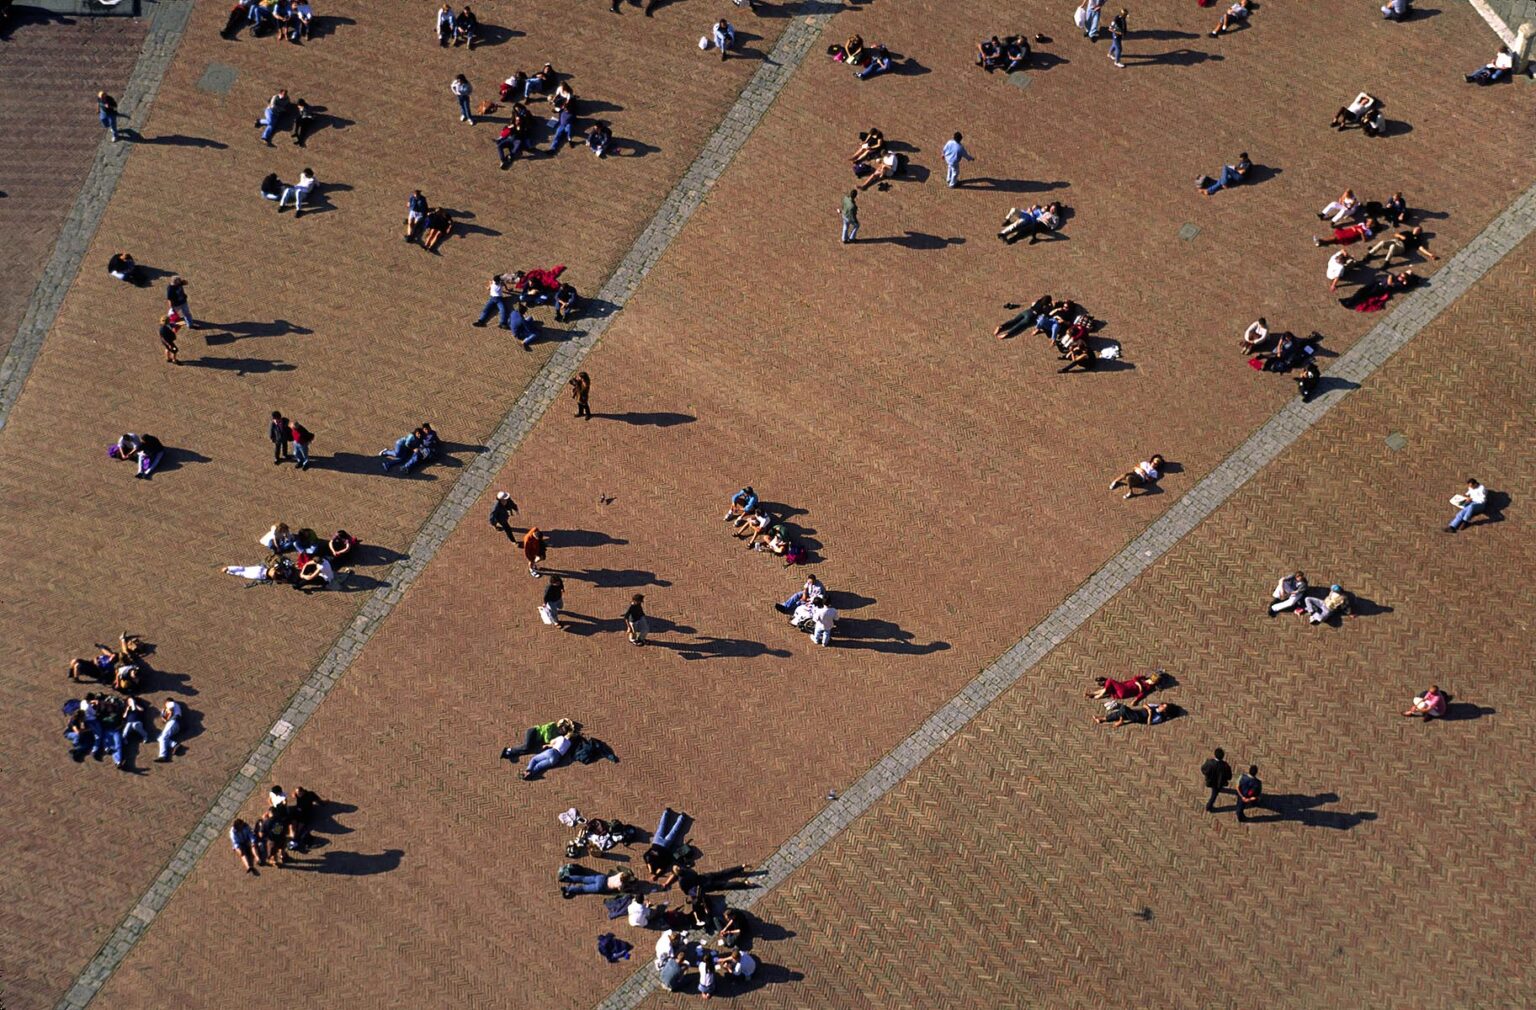 People on the CAMPO (central plaza) as seen from the BELL TOWER in the MEDIEVAL city of SIENA - TUSCANY, ITALY